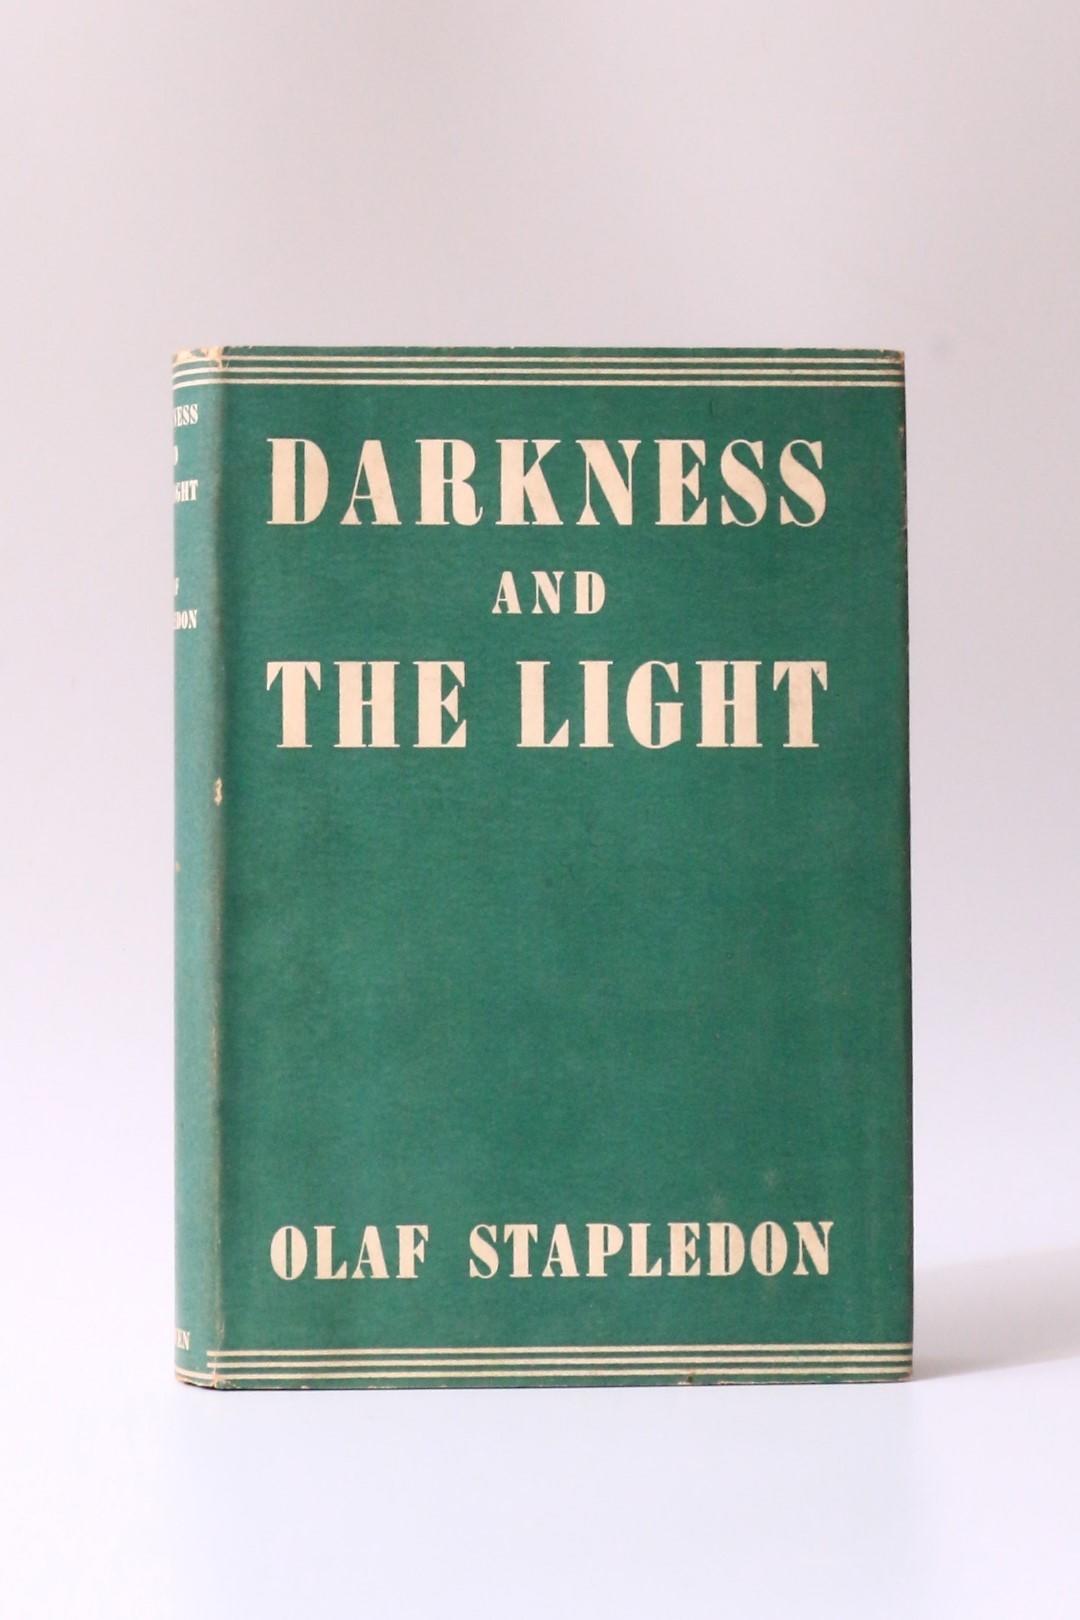 Olaf Stapledon - Darkness and the Light - Methuen, 1942, Signed First Edition.